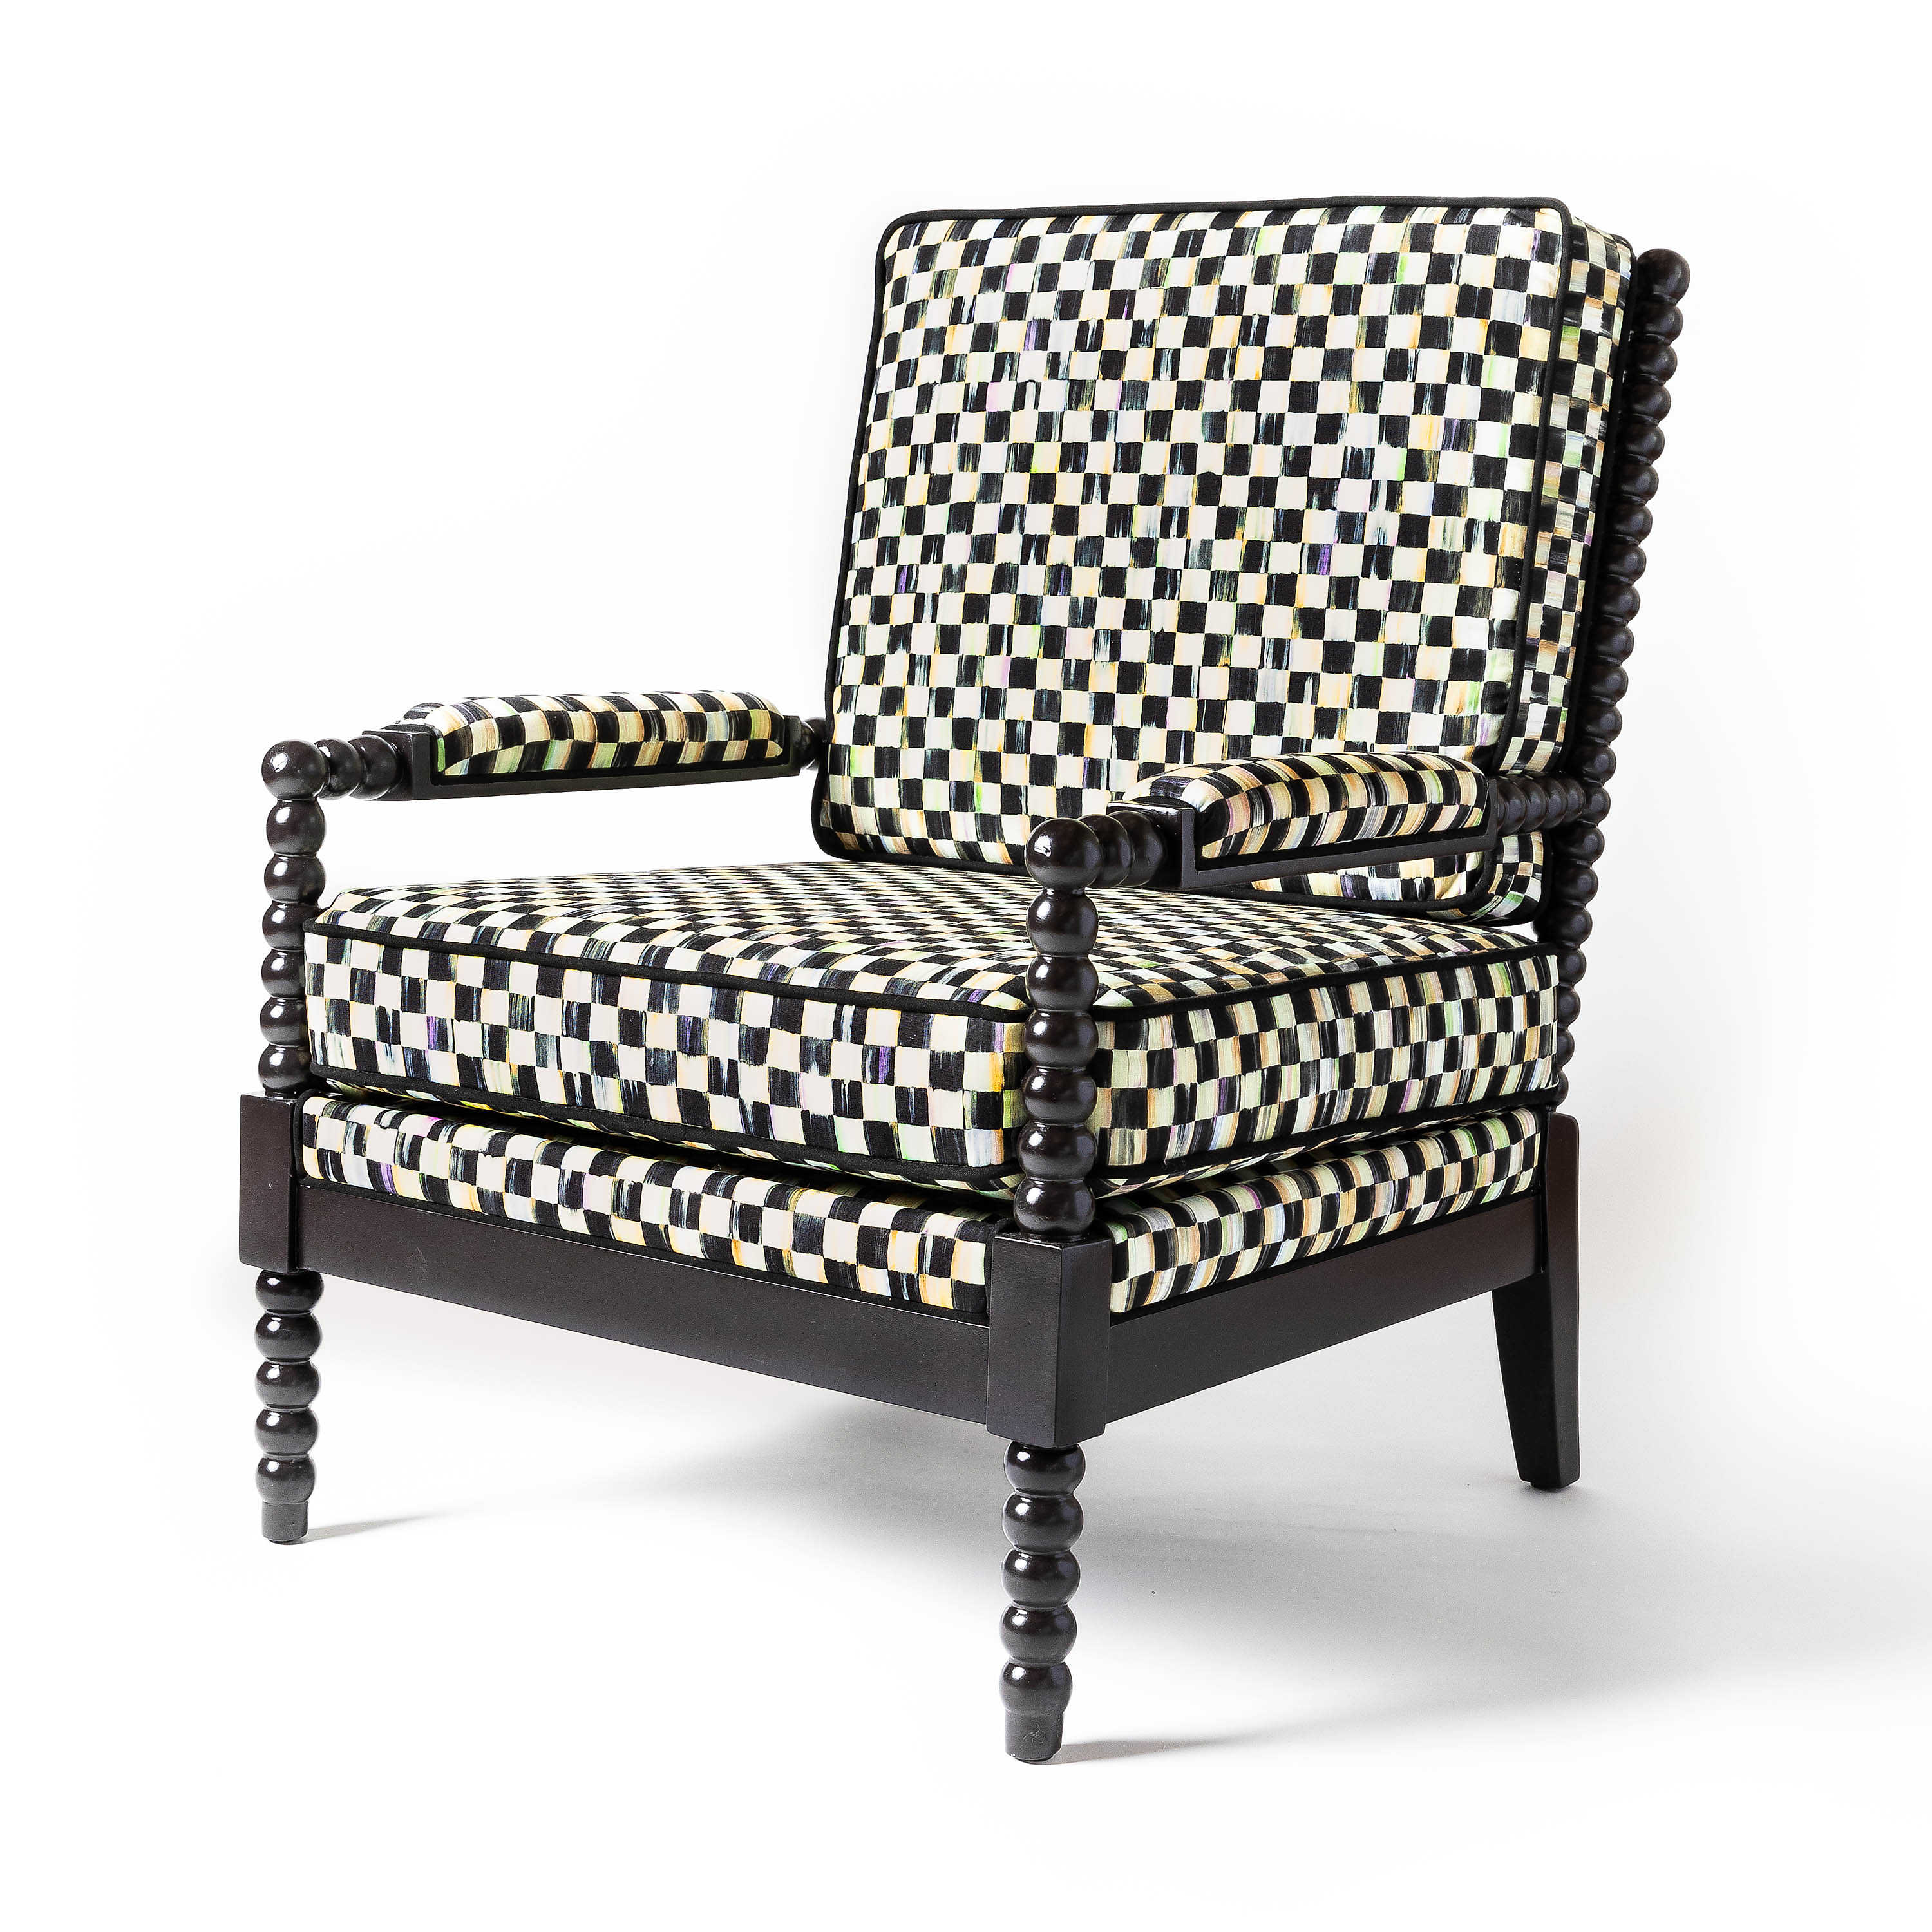 Spindle Check Outdoor Chair mackenzie-childs Panama 0